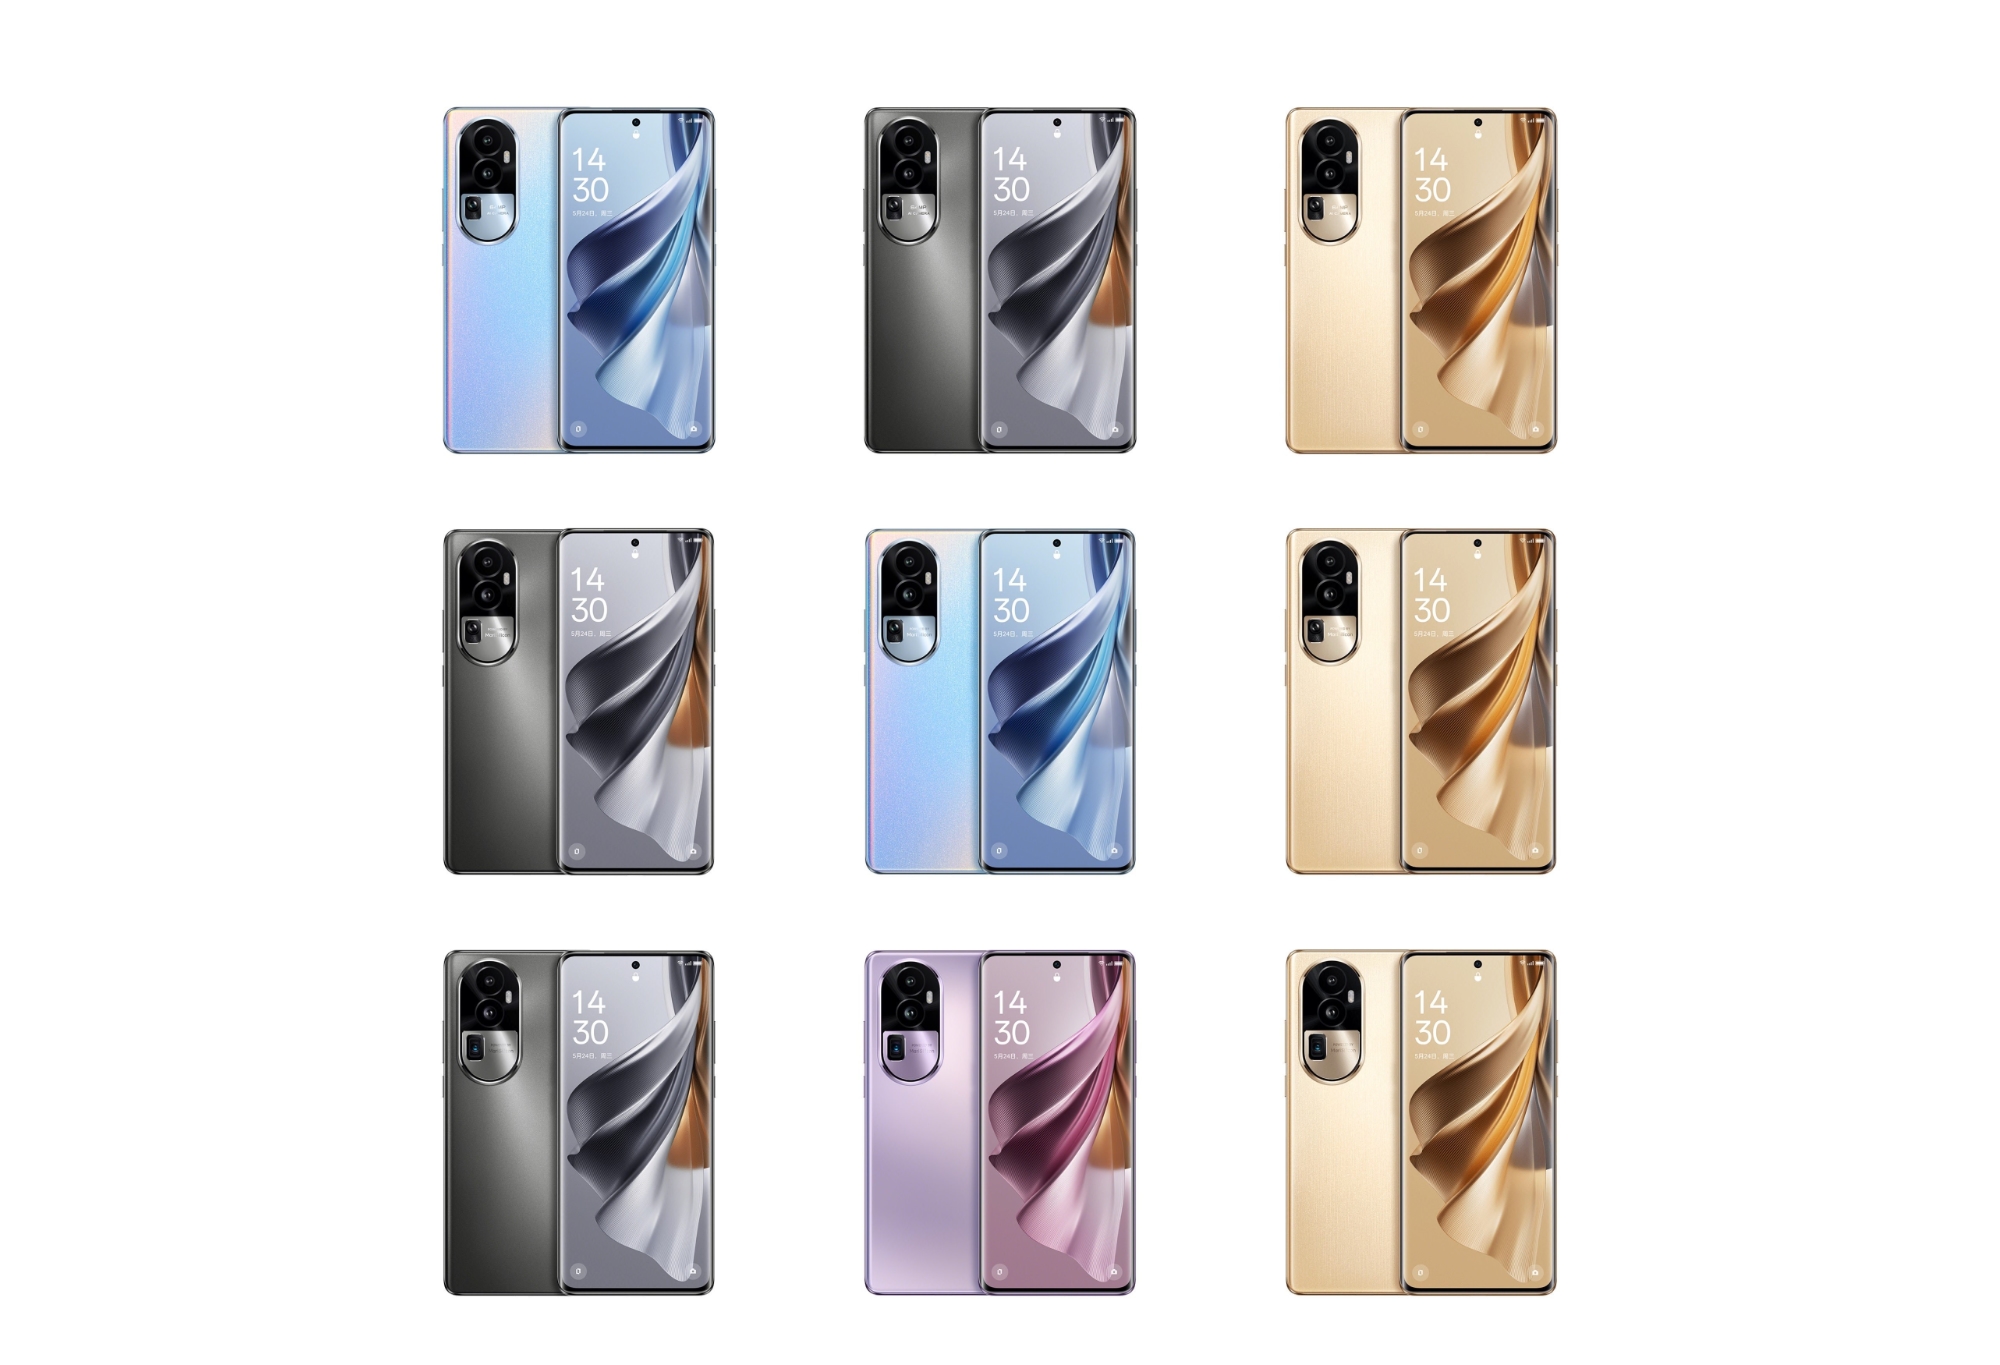 High-quality images of the OPPO Reno 10 smartphone have surfaced online